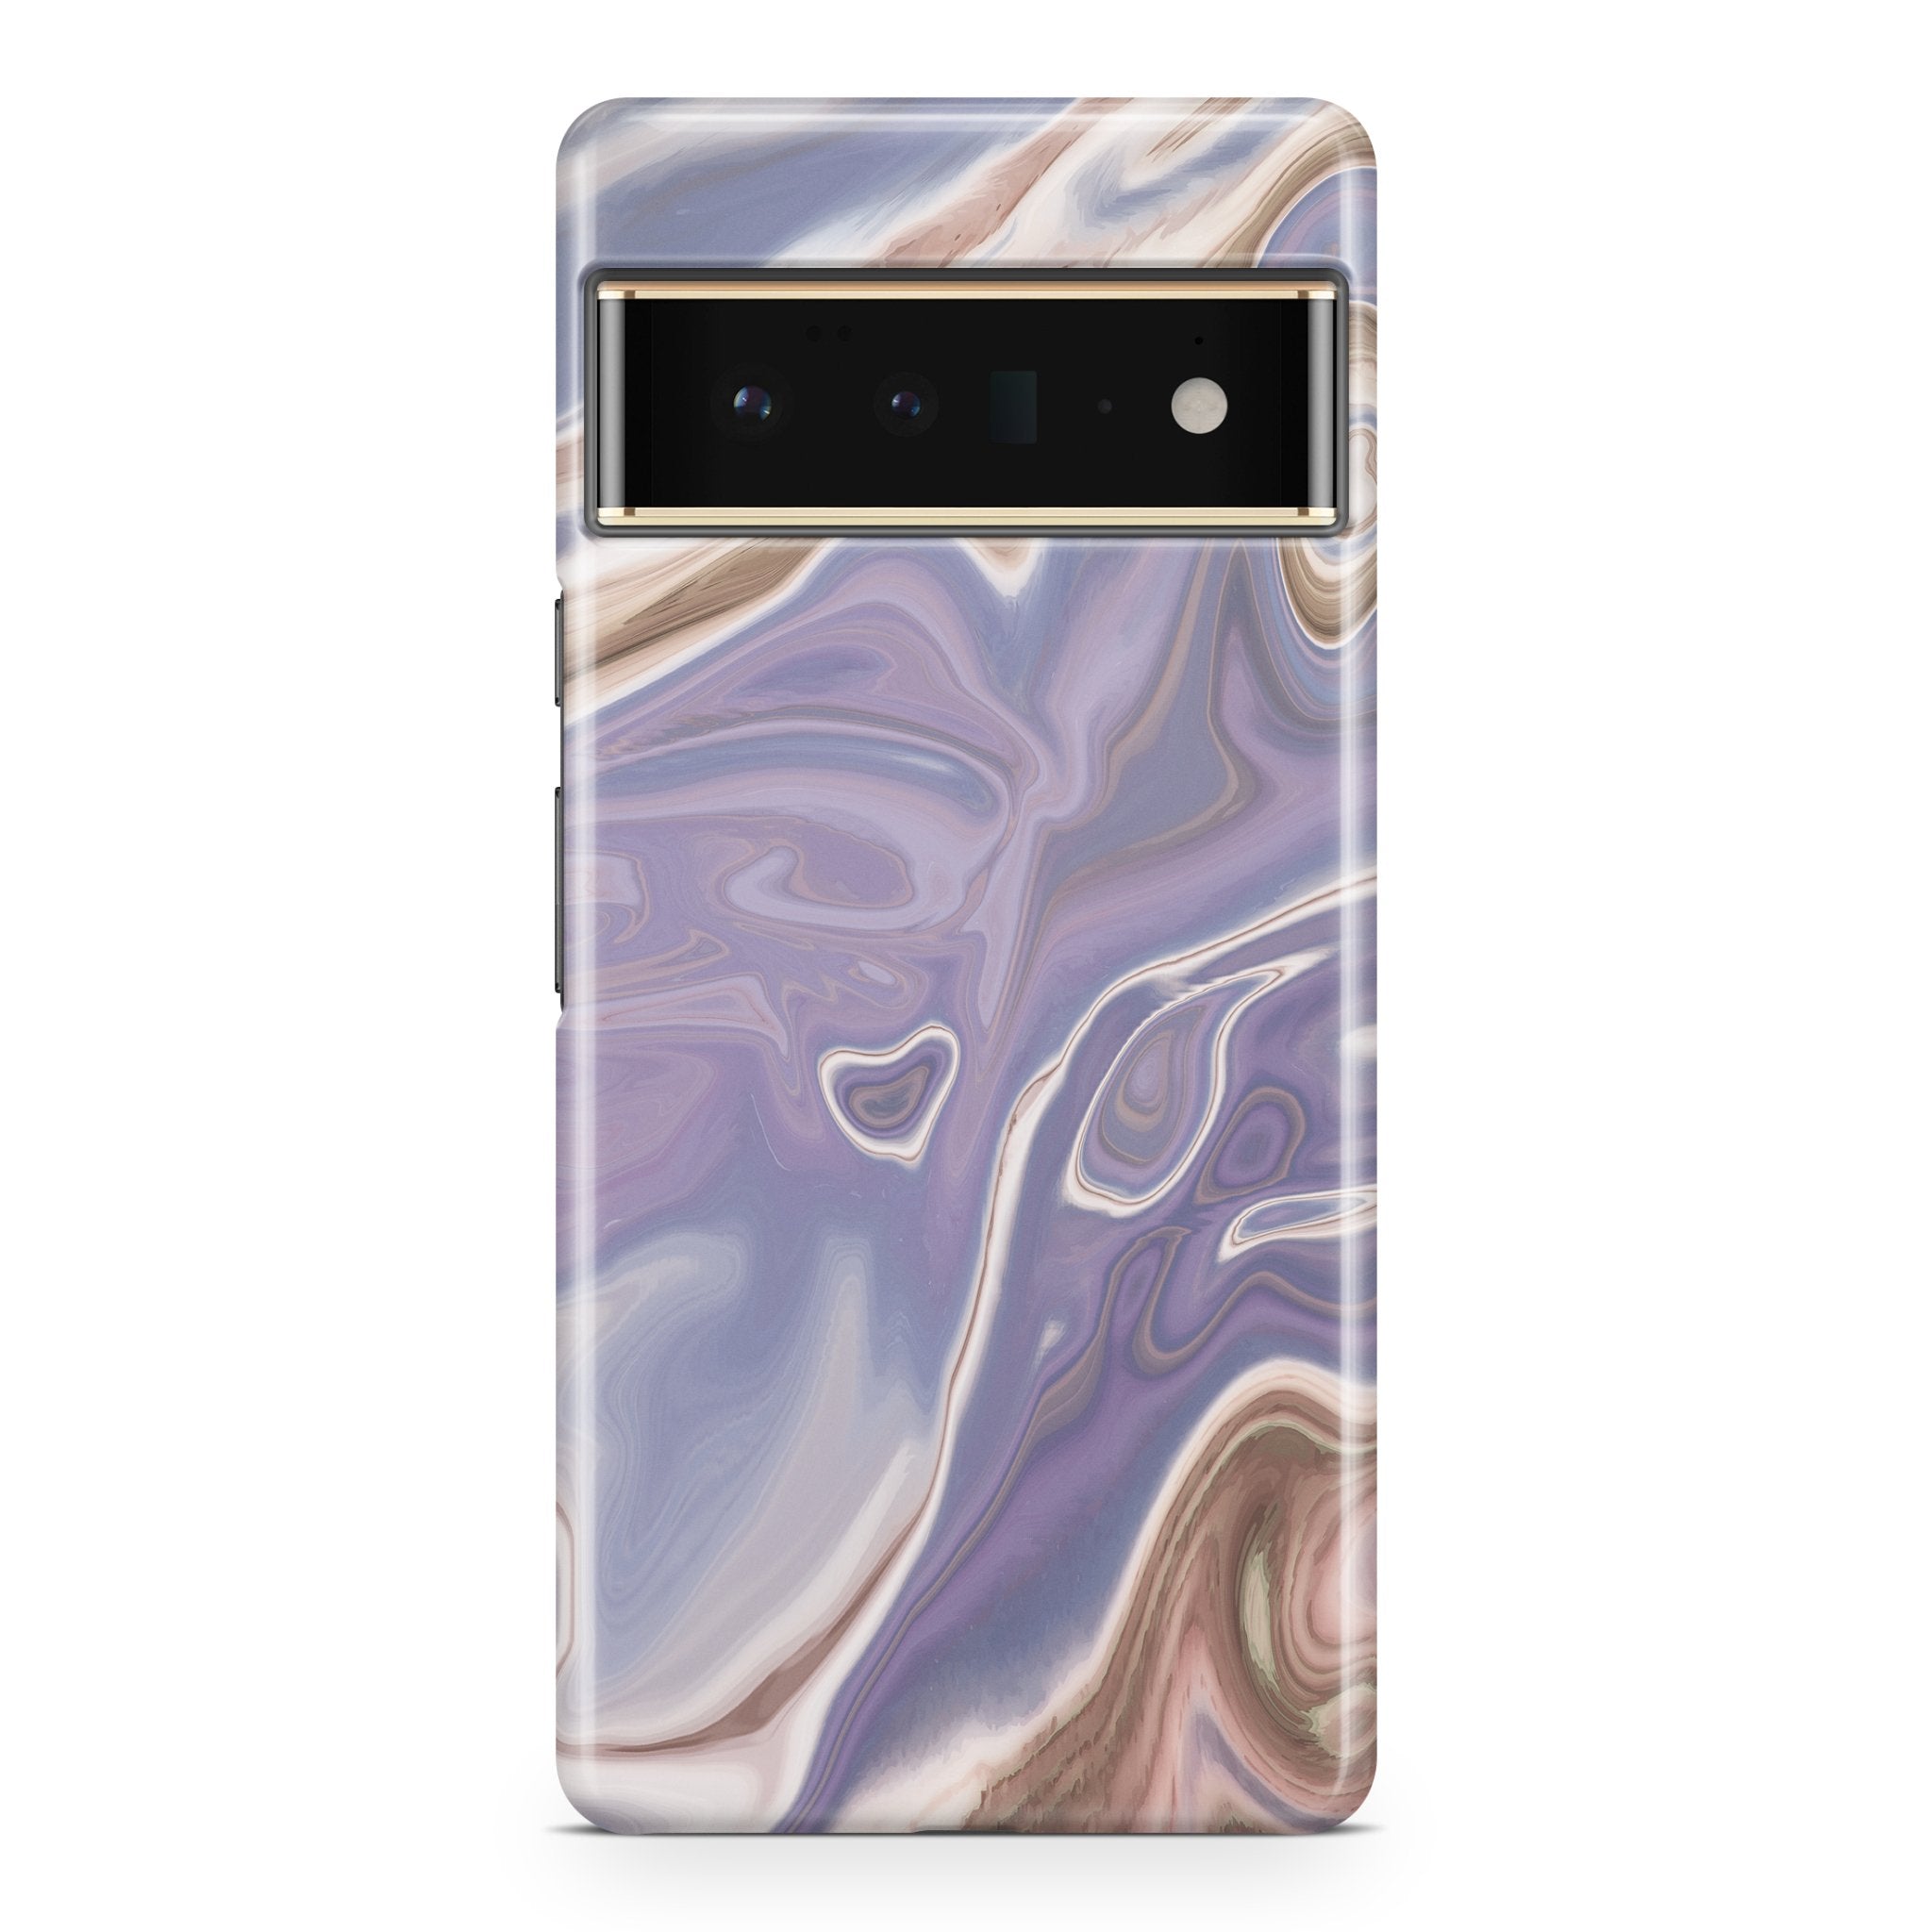 Southwest Agate - Google phone case designs by CaseSwagger